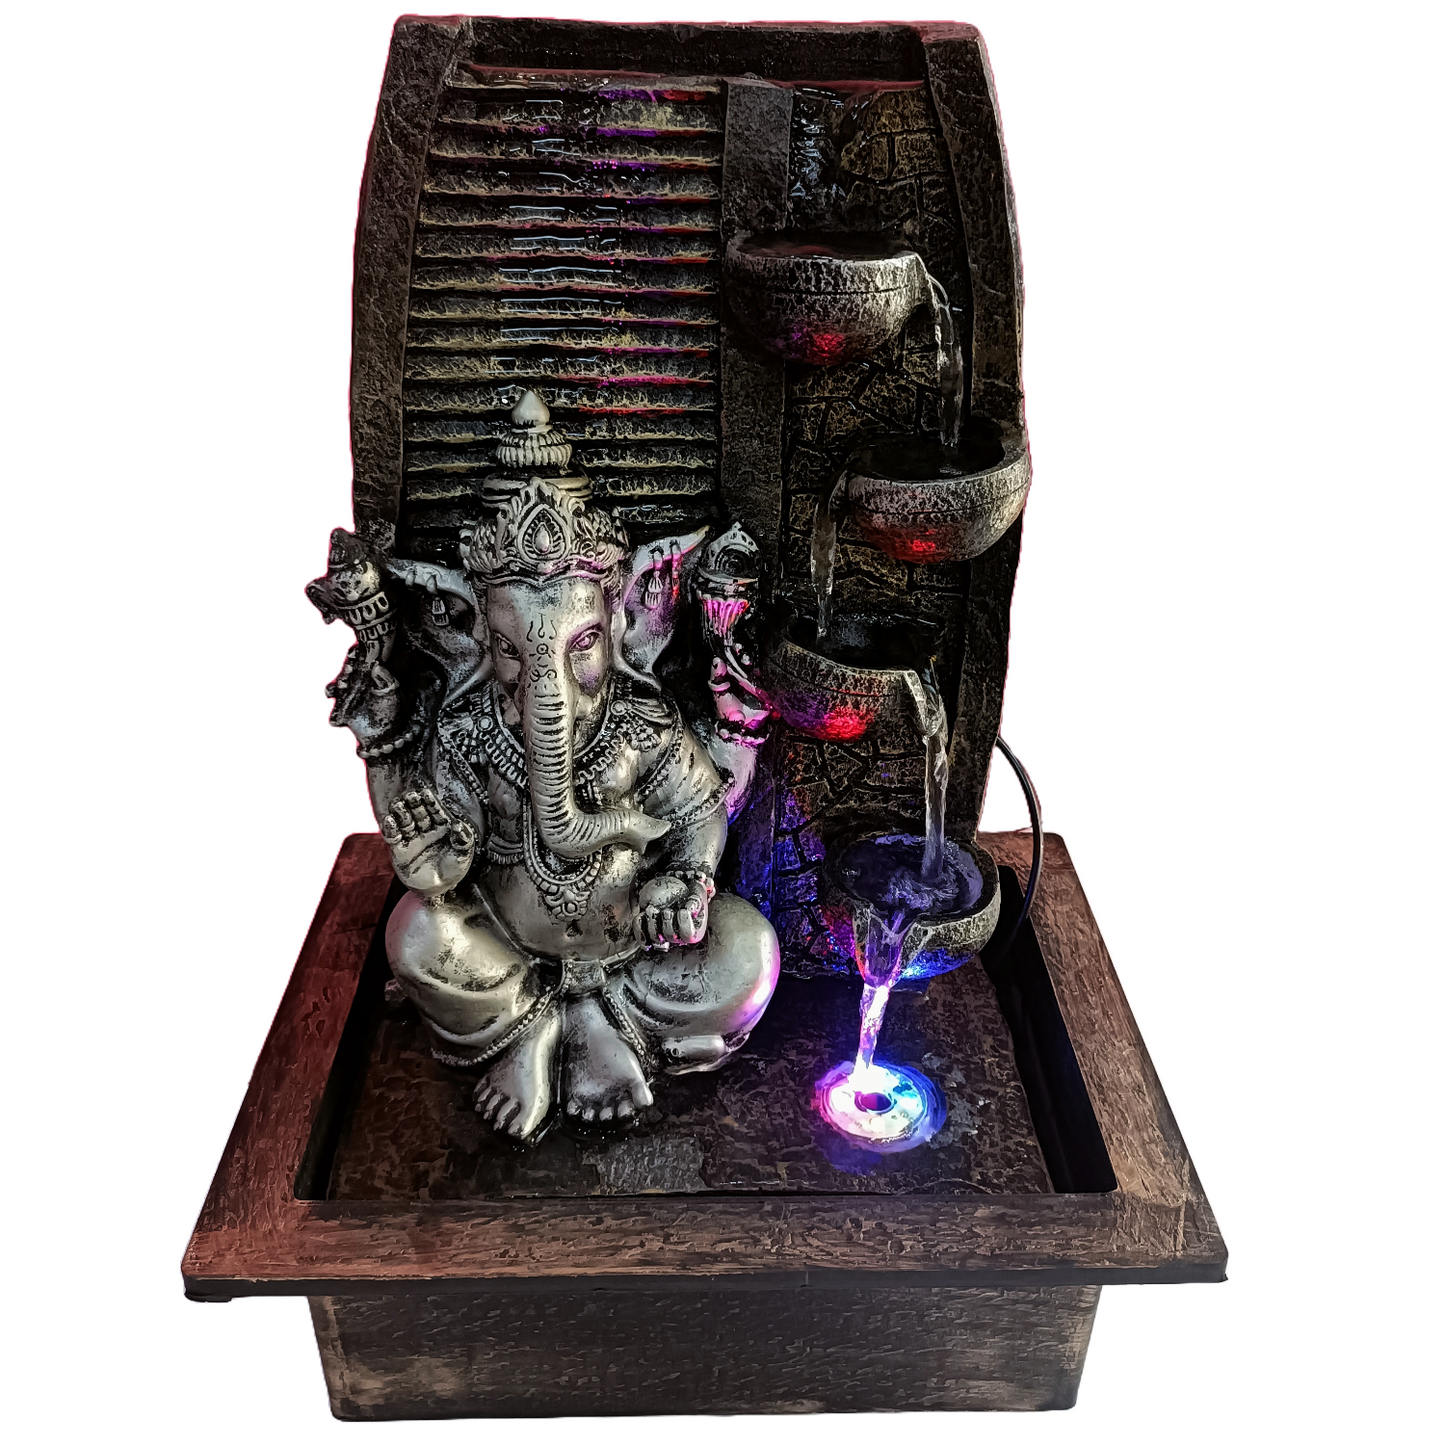 Water Fountain ALiLA Silver Ganesha Vinayaka Statue Waterfall Fountain with LED Lights for Home/Living room/Garden/Table/ Decoration gifting item Water Fountain